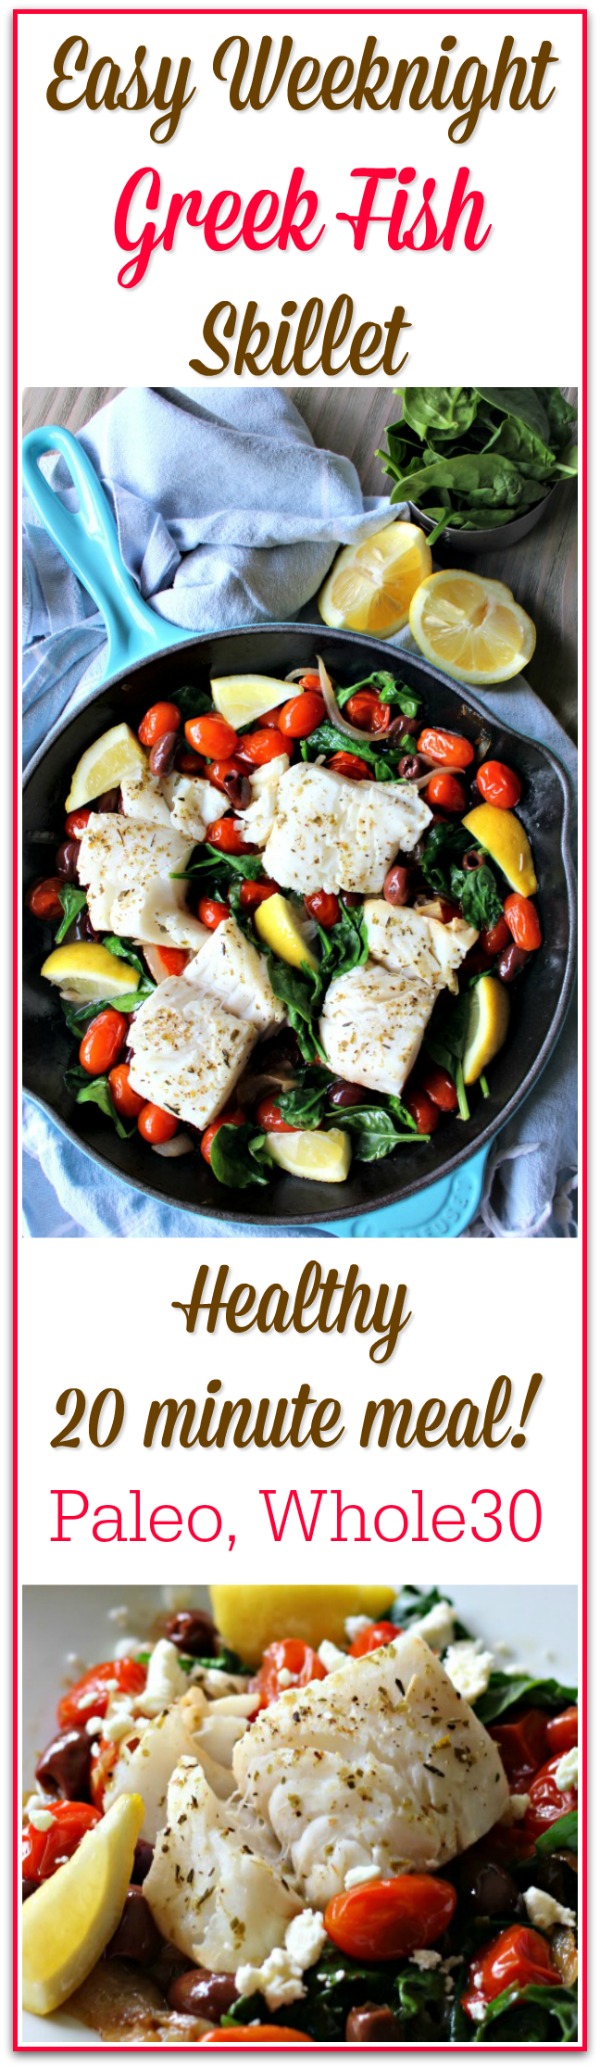 This Easy Greek Fish Skillet recipe has restaurant worthy flavor yet is simple enough to make on a busy weeknight! It's a one pan, healthy meal that's Paleo, Whole30 and Gluten Free.